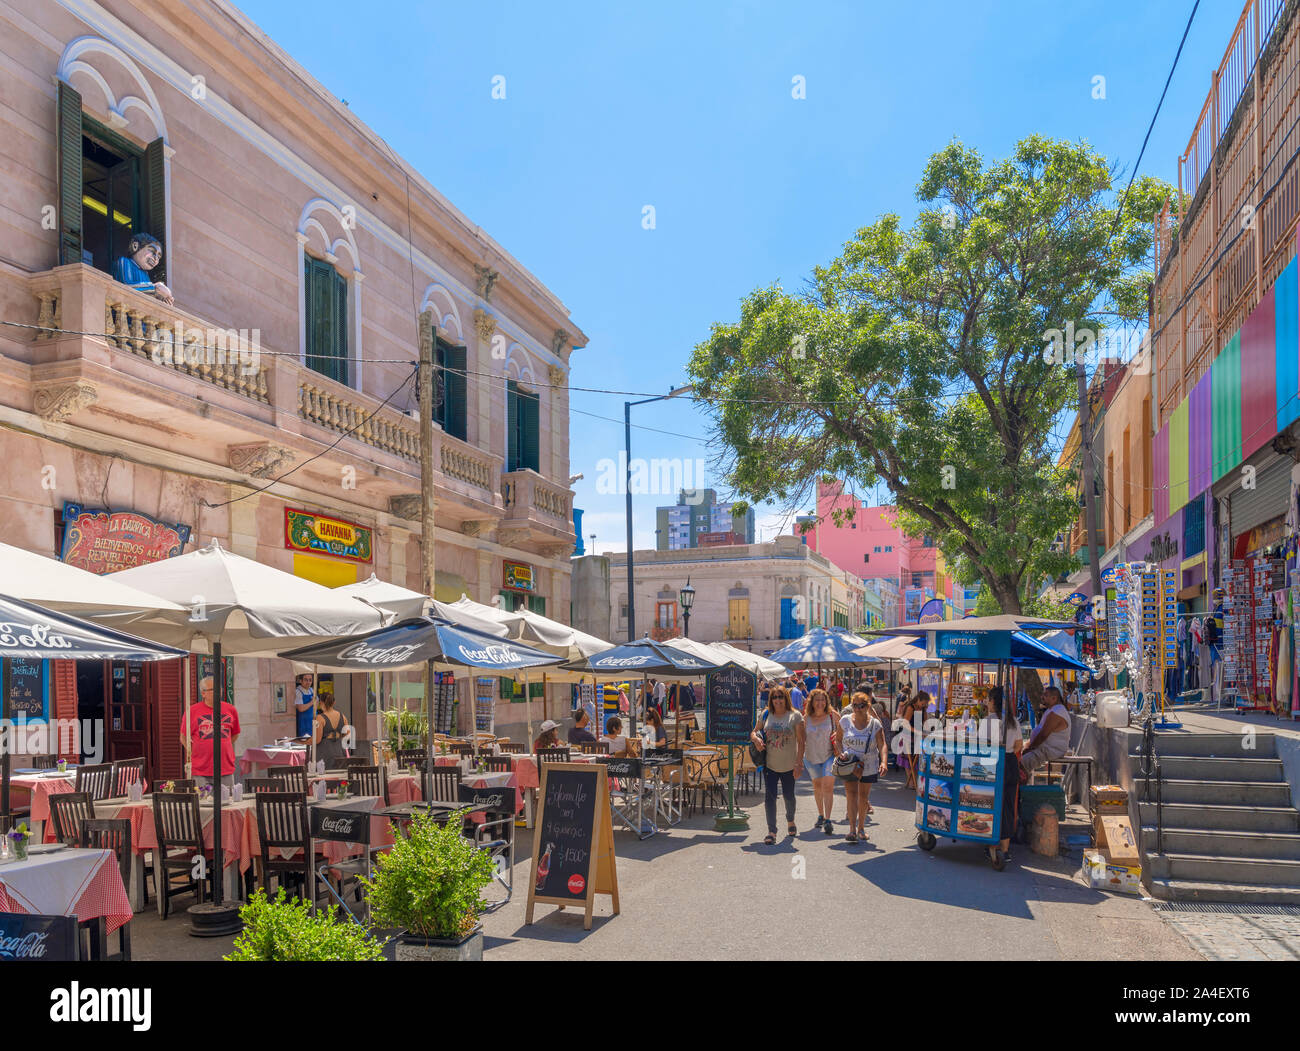 Bars, restaurants and cafes on El Caminito, a colourful street in La Boca district of Buenos Aires, Argentina Stock Photo